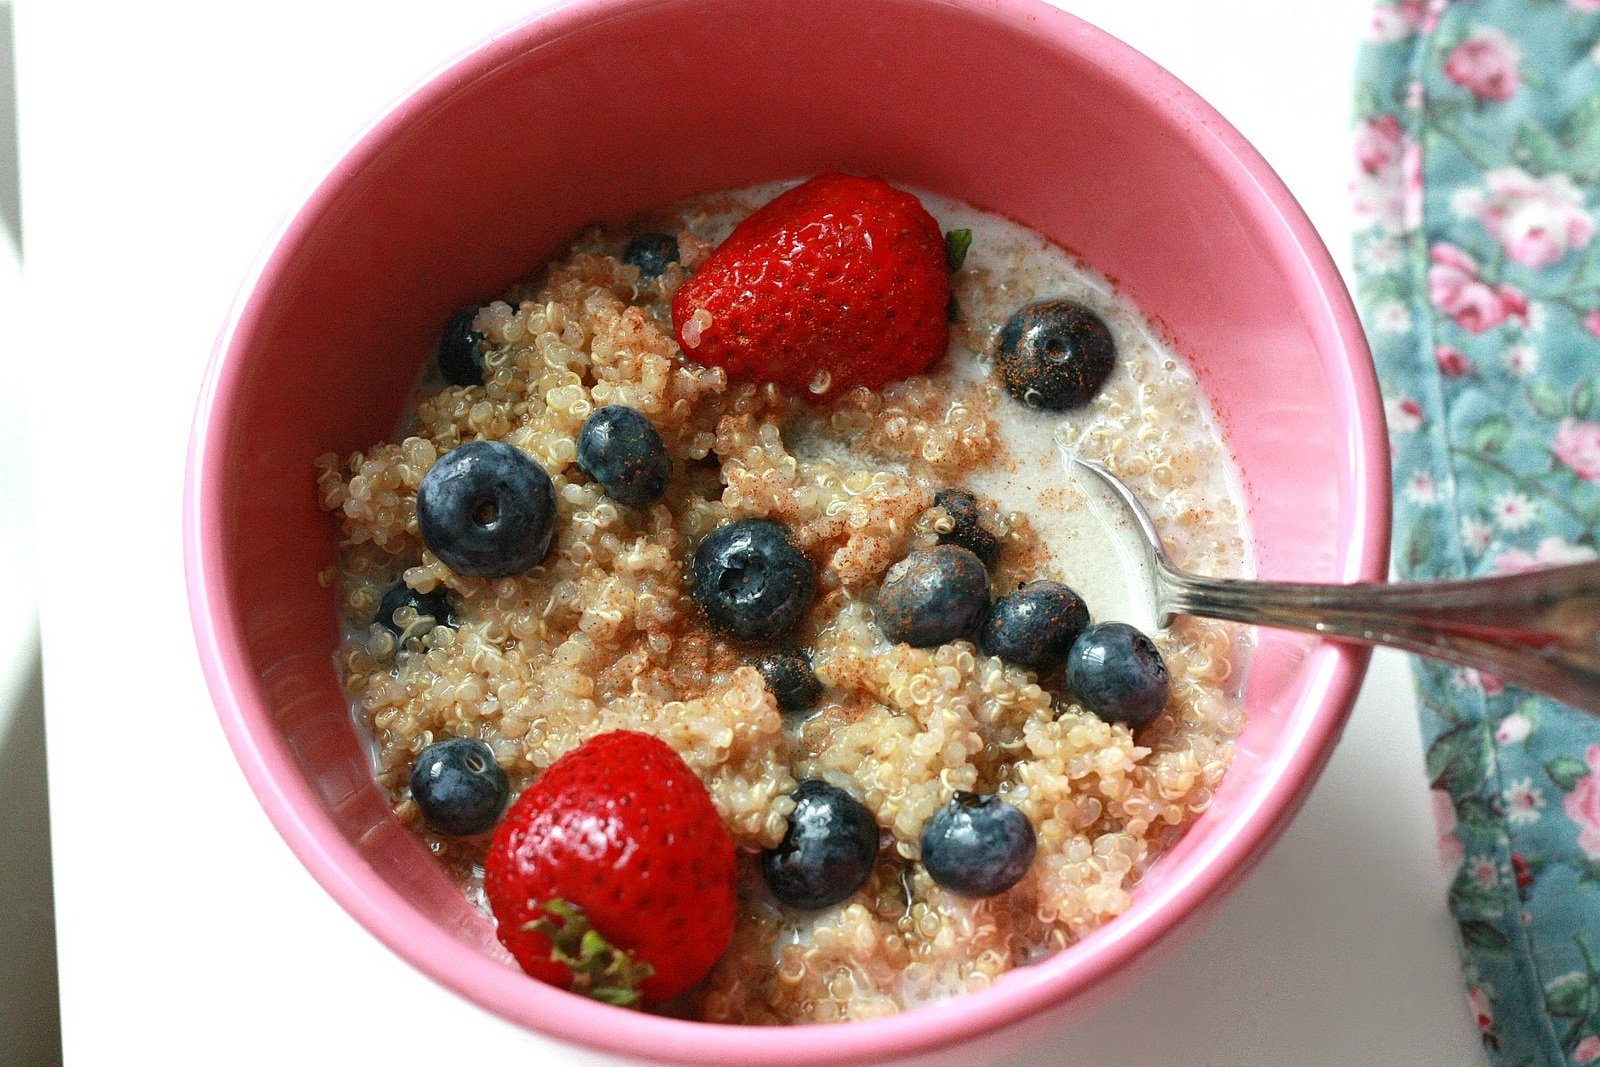 20 Healthy Breakfasts Under 400 Calories For Mornings On The Run